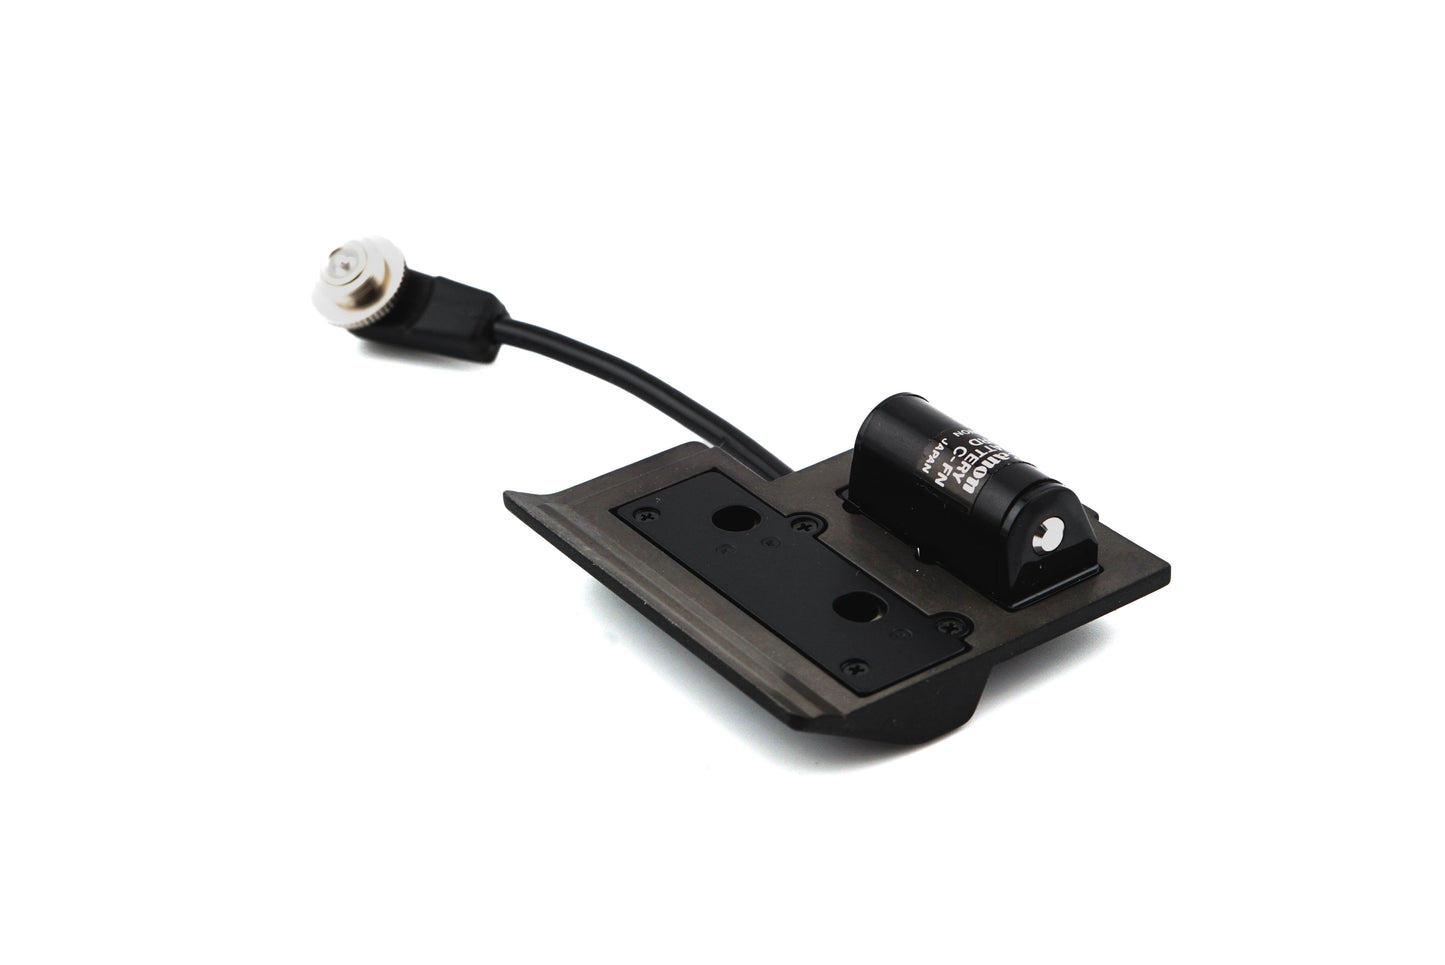 Canon Battery Cord C-FN